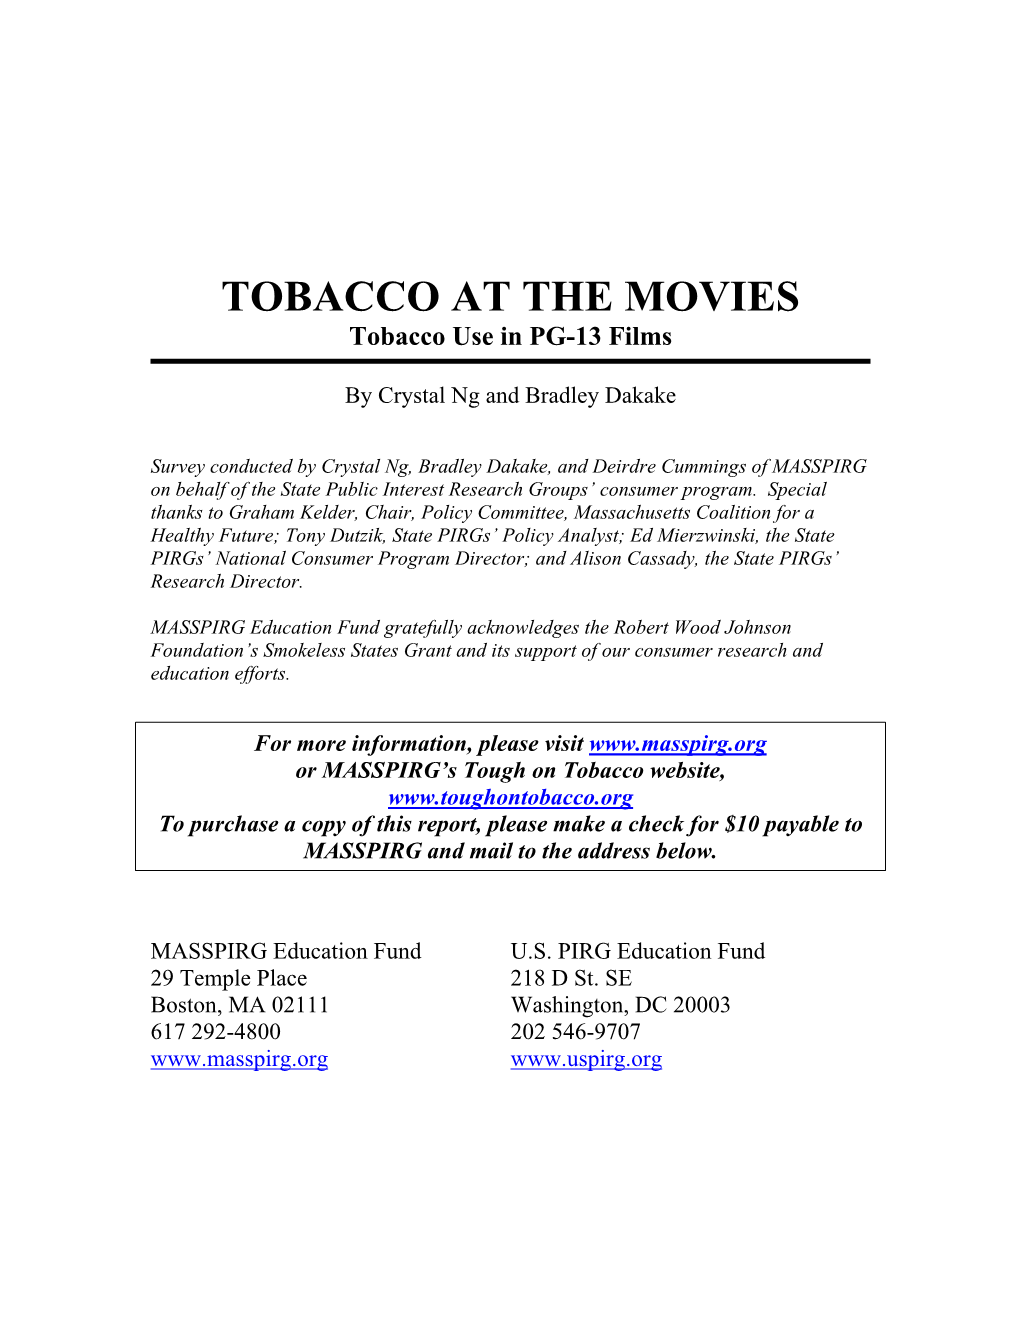 TOBACCO at the MOVIES Tobacco Use in PG-13 Films